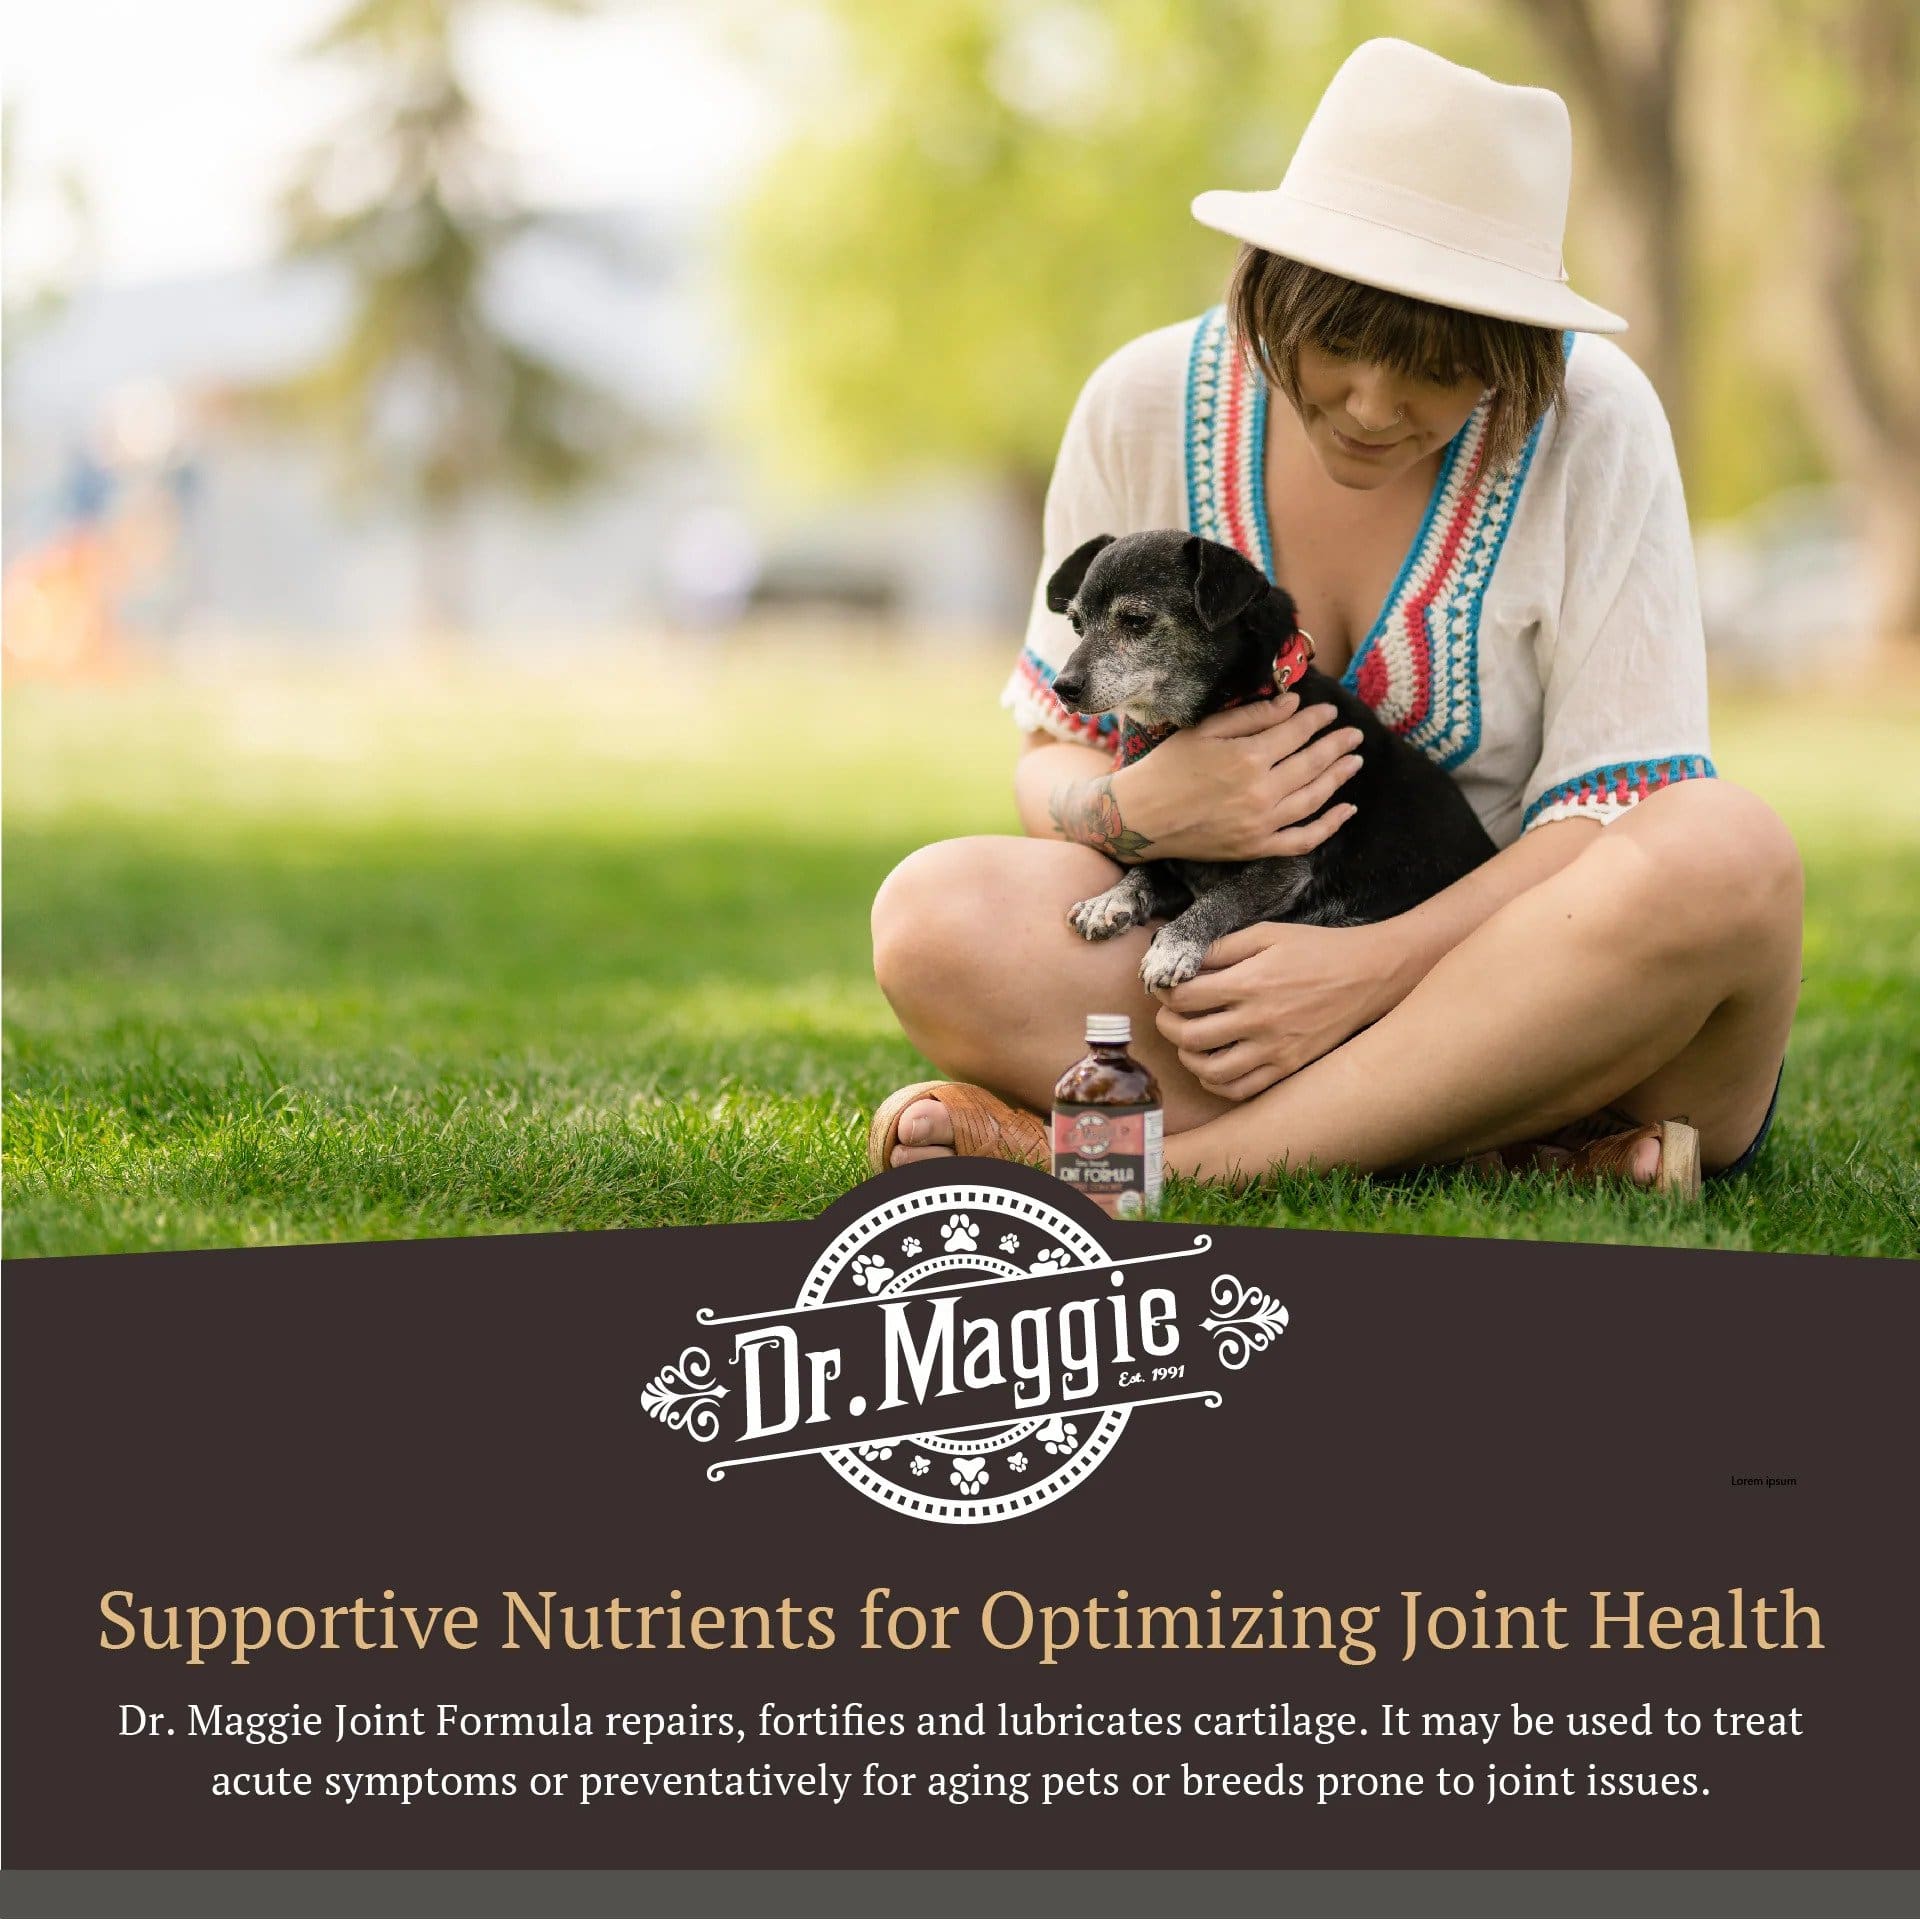 Dr. Maggie Joint Formula - Traditional Joint Supplement How to use